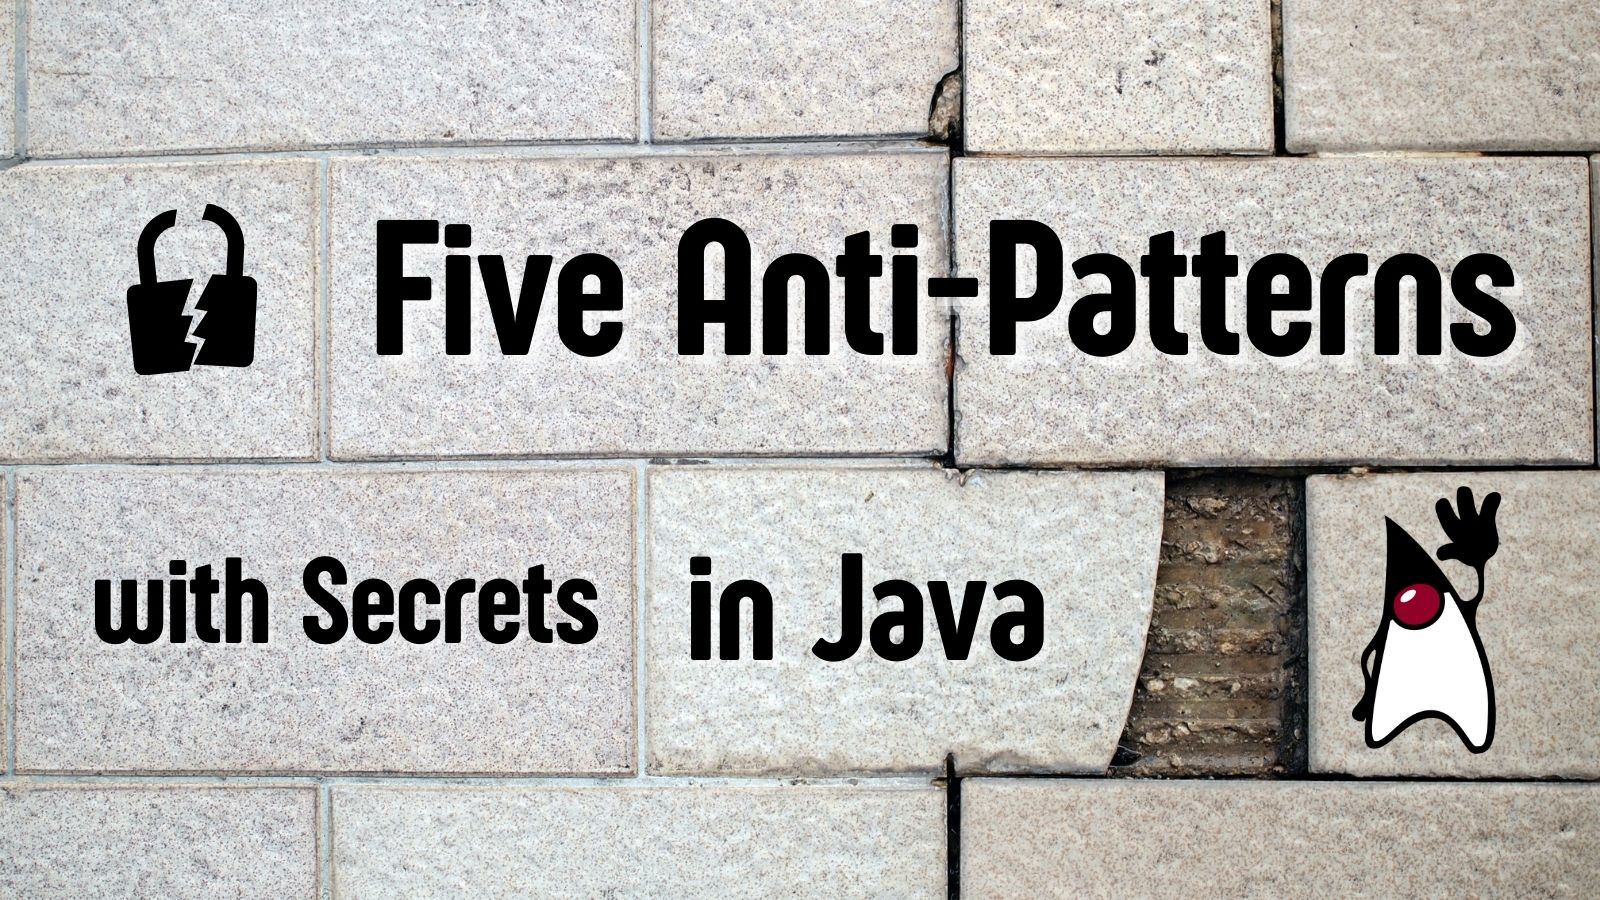 Five Anti-Patterns with Secrets in Java